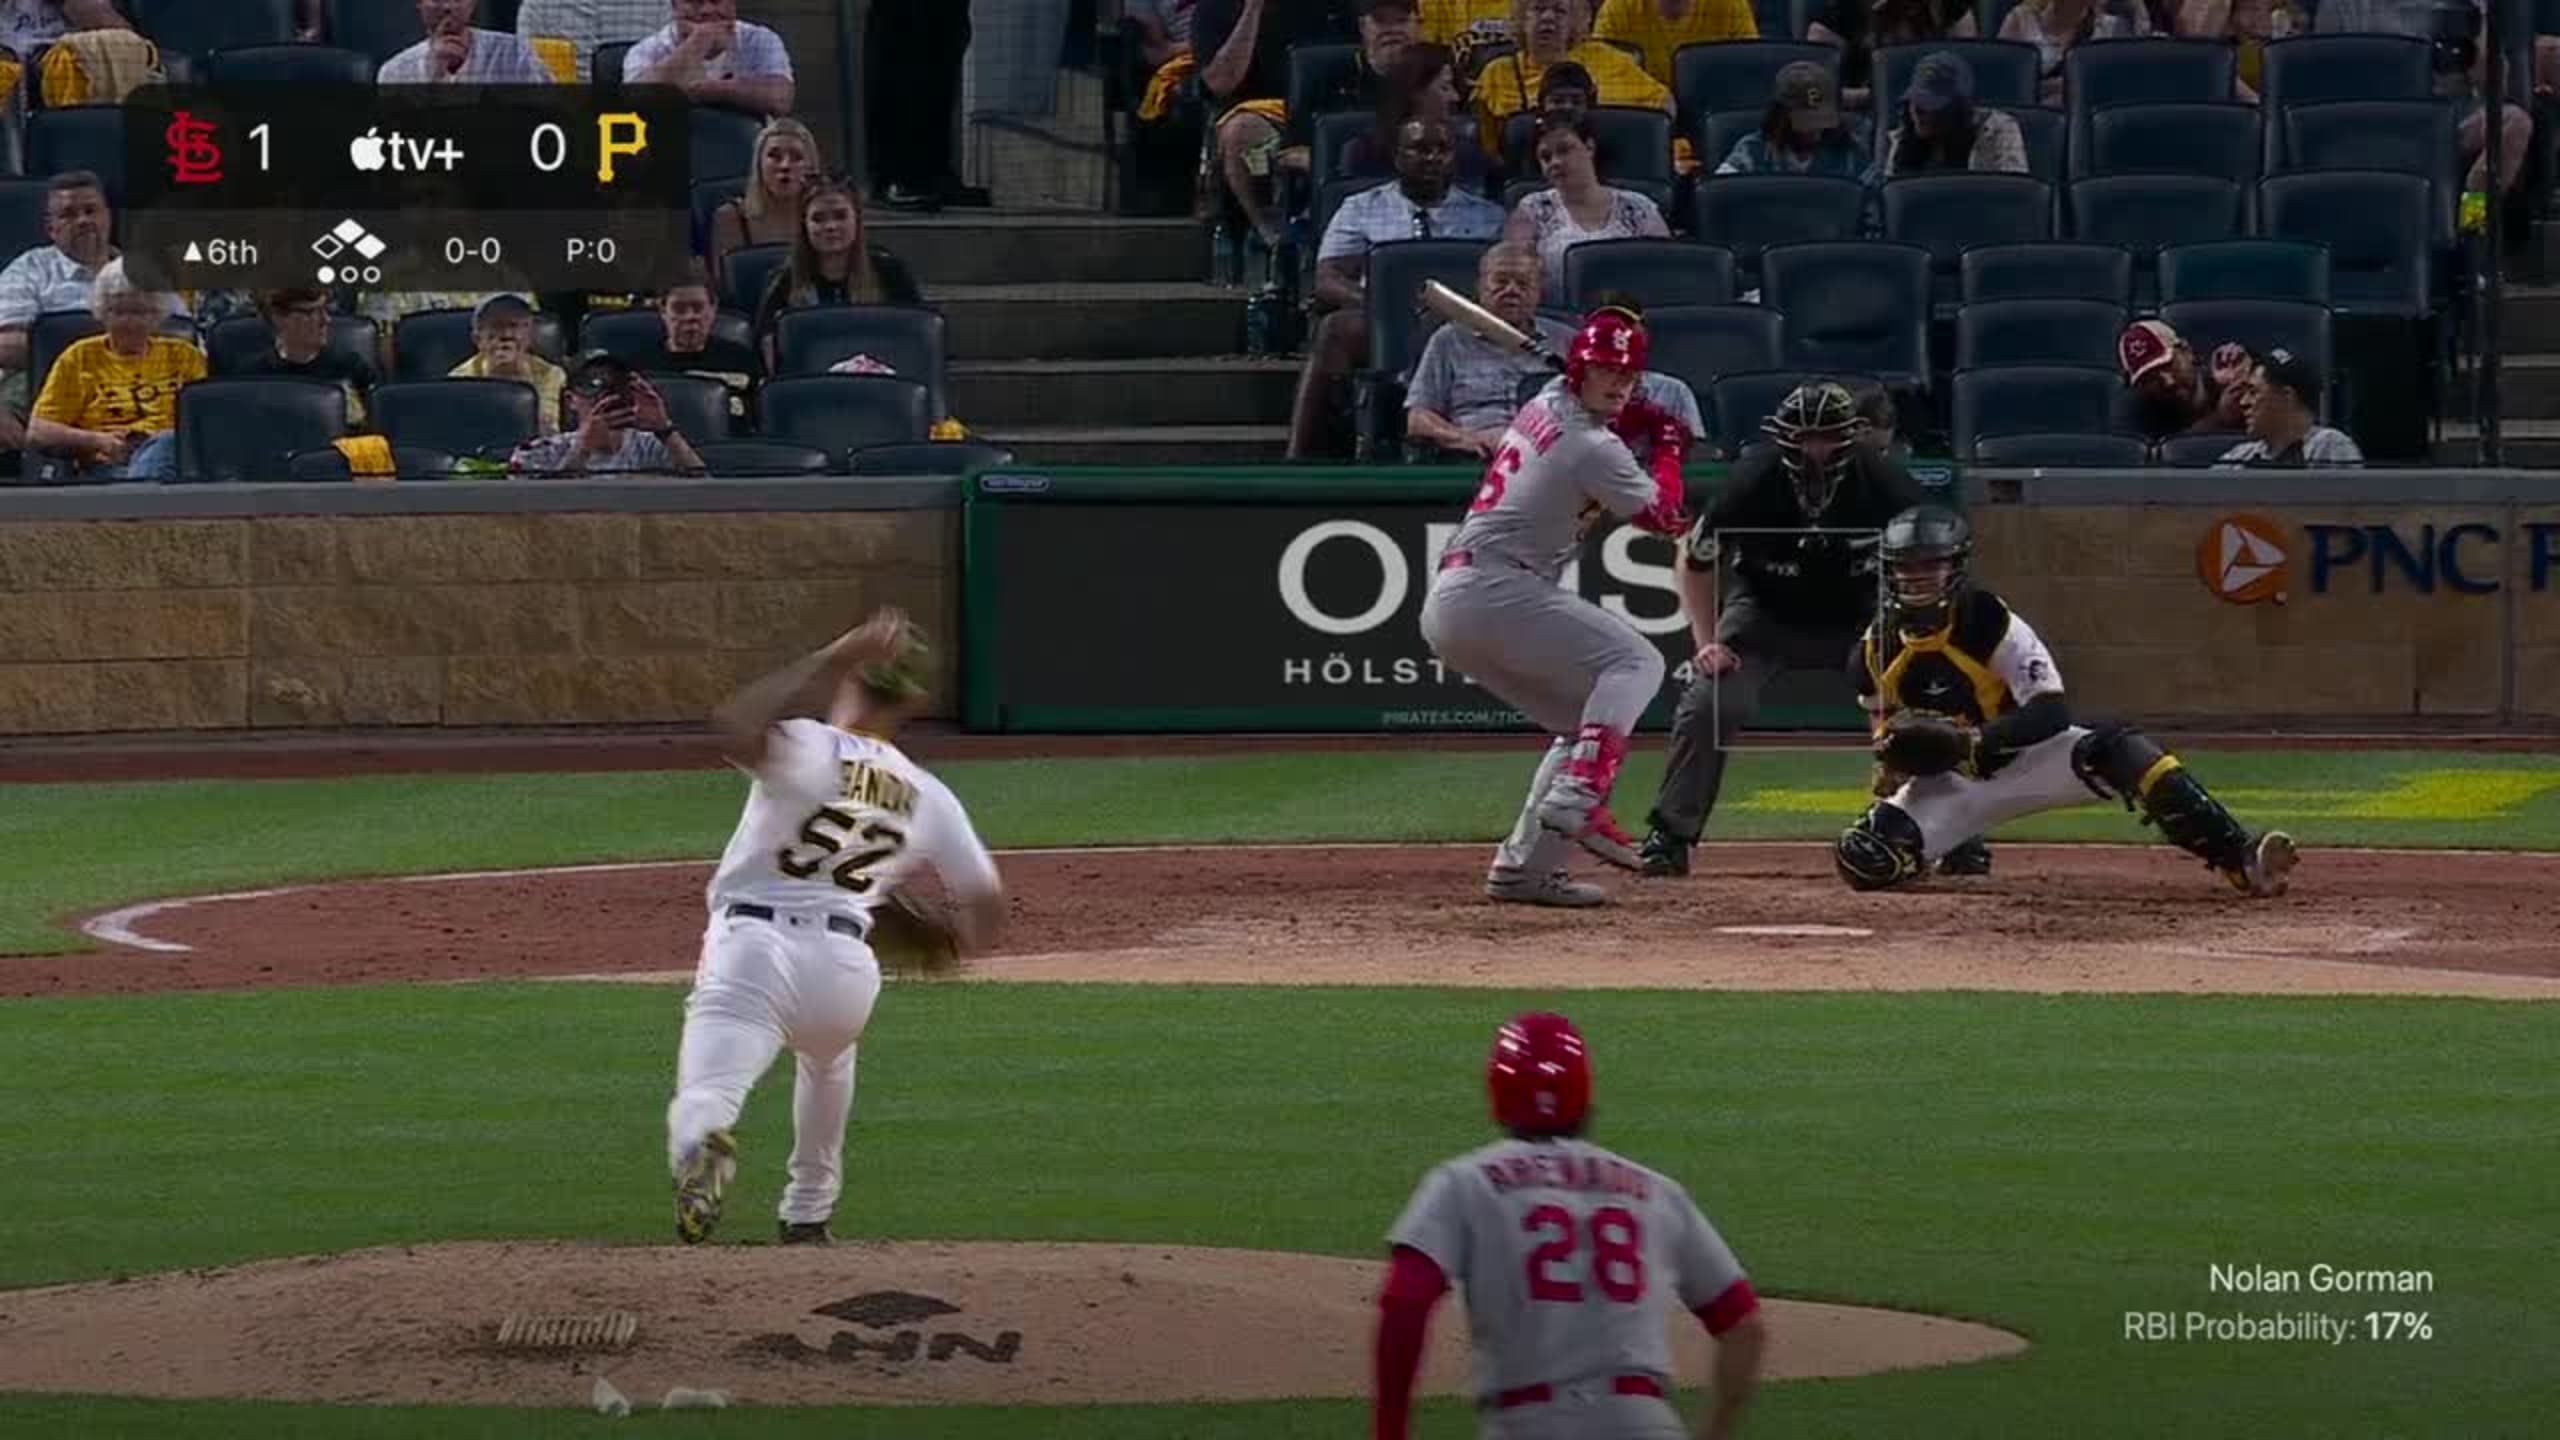 How Cardinals and Nolan Gorman's unique base running confused